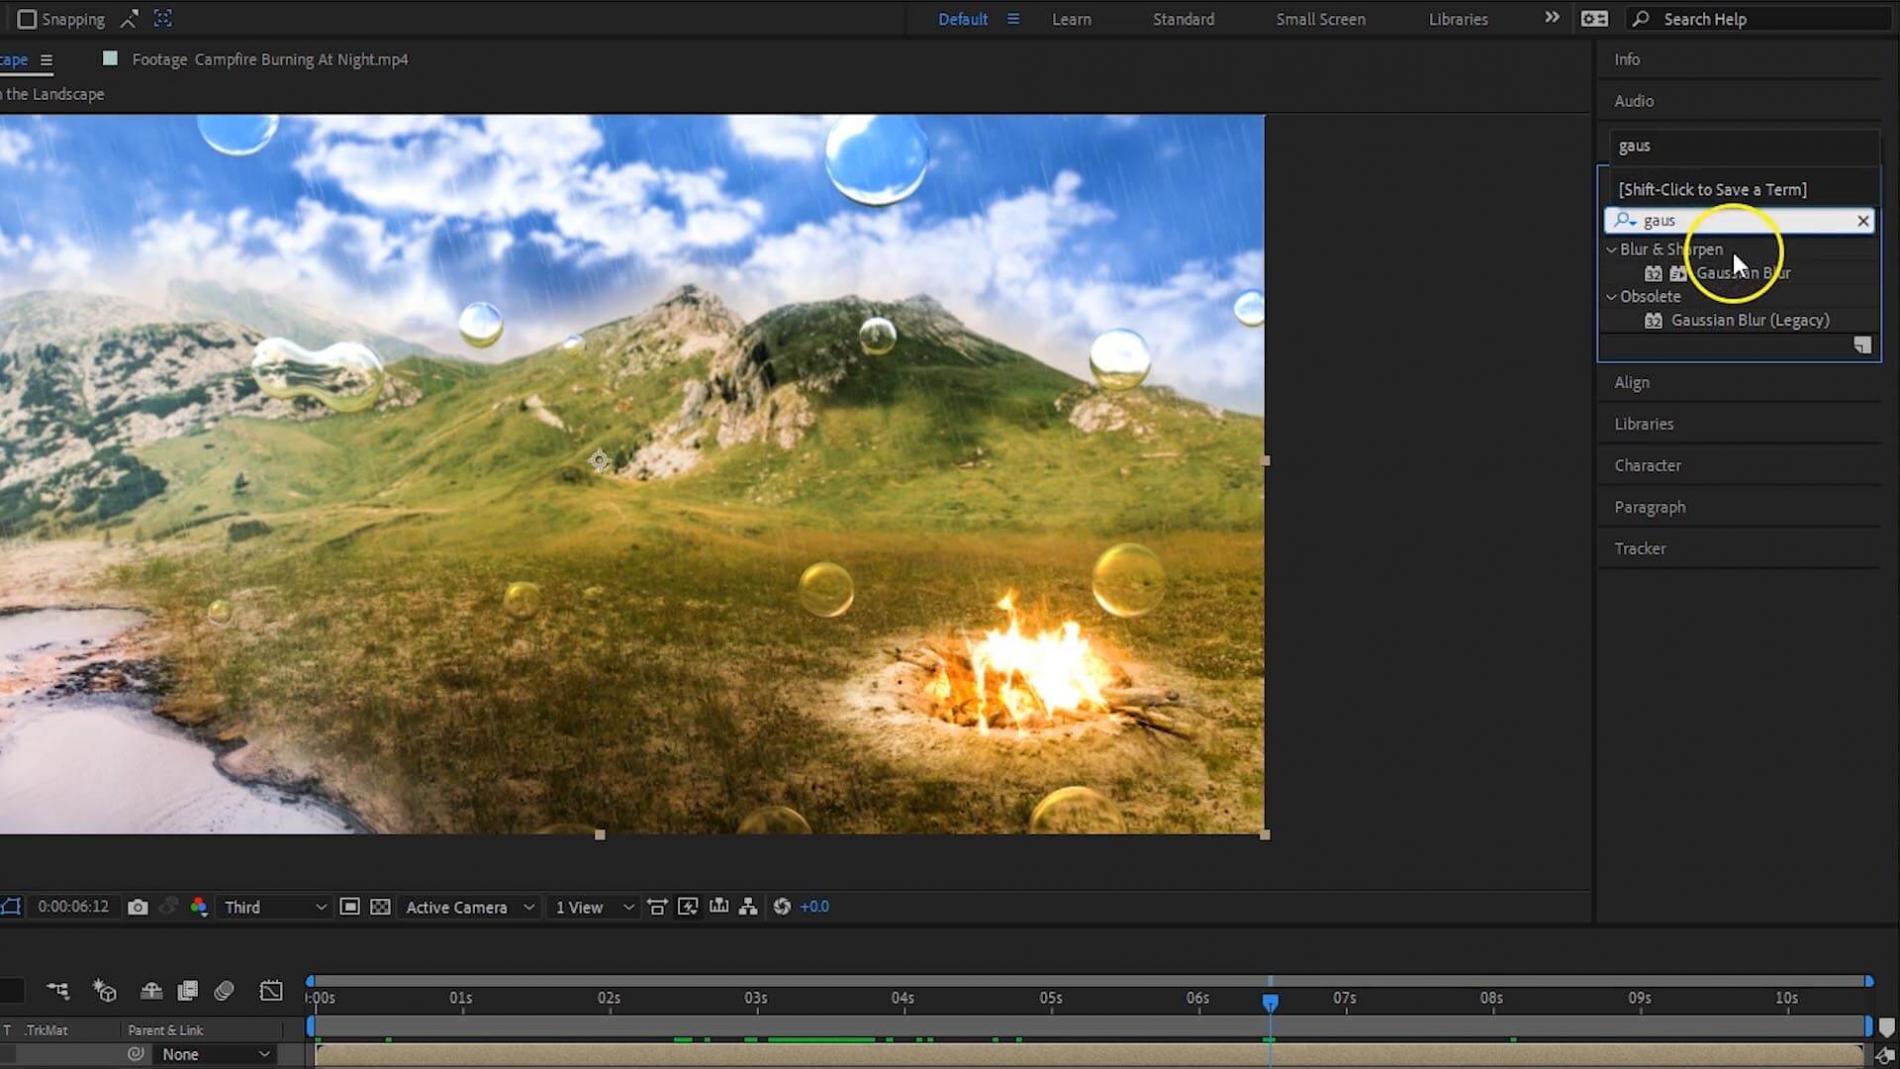 Khoá học After Effects cơ bản Vietsub từ Cinecom - Học trong 3 giờ - Learn Adobe After Effects For Beginners